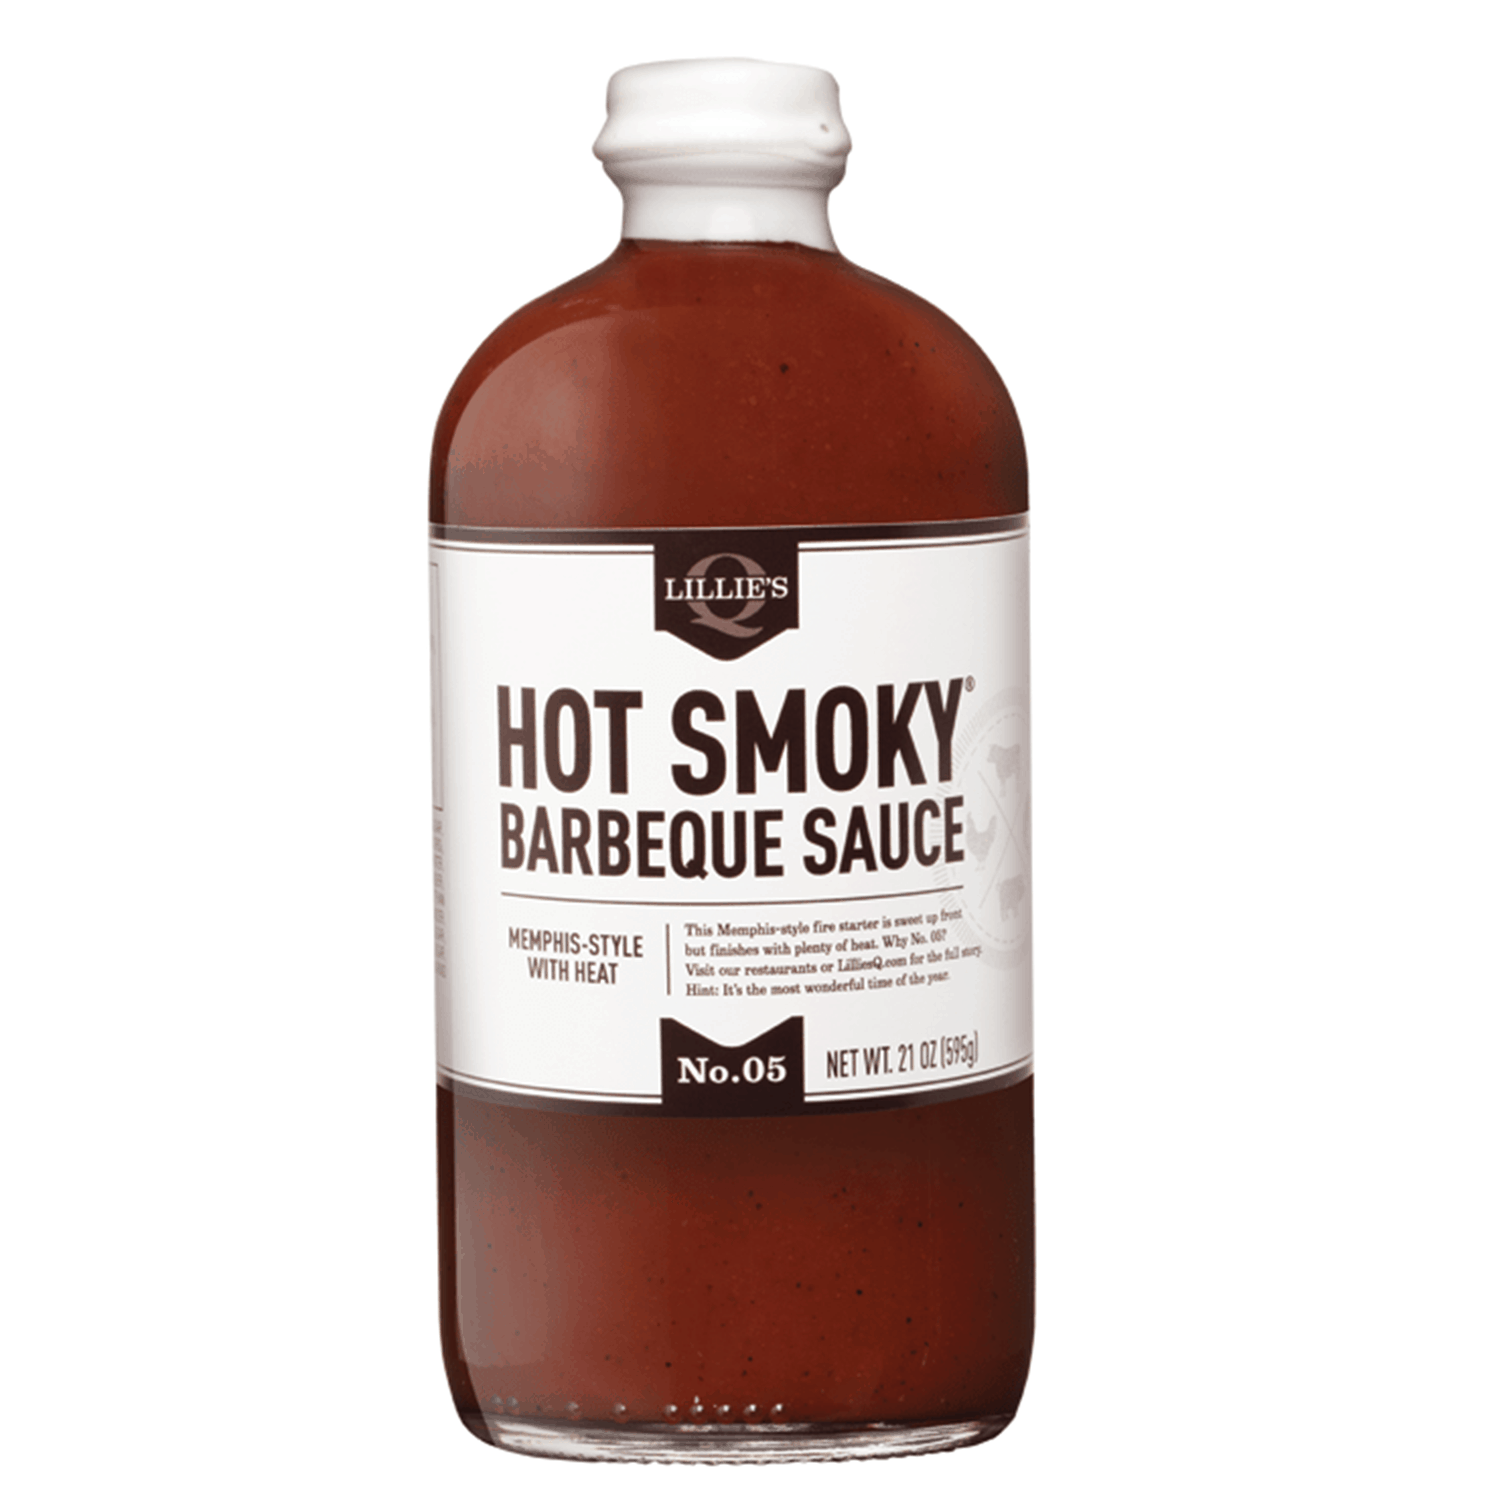 Lillie’s Q Hot Smoky Barbeque Sauce